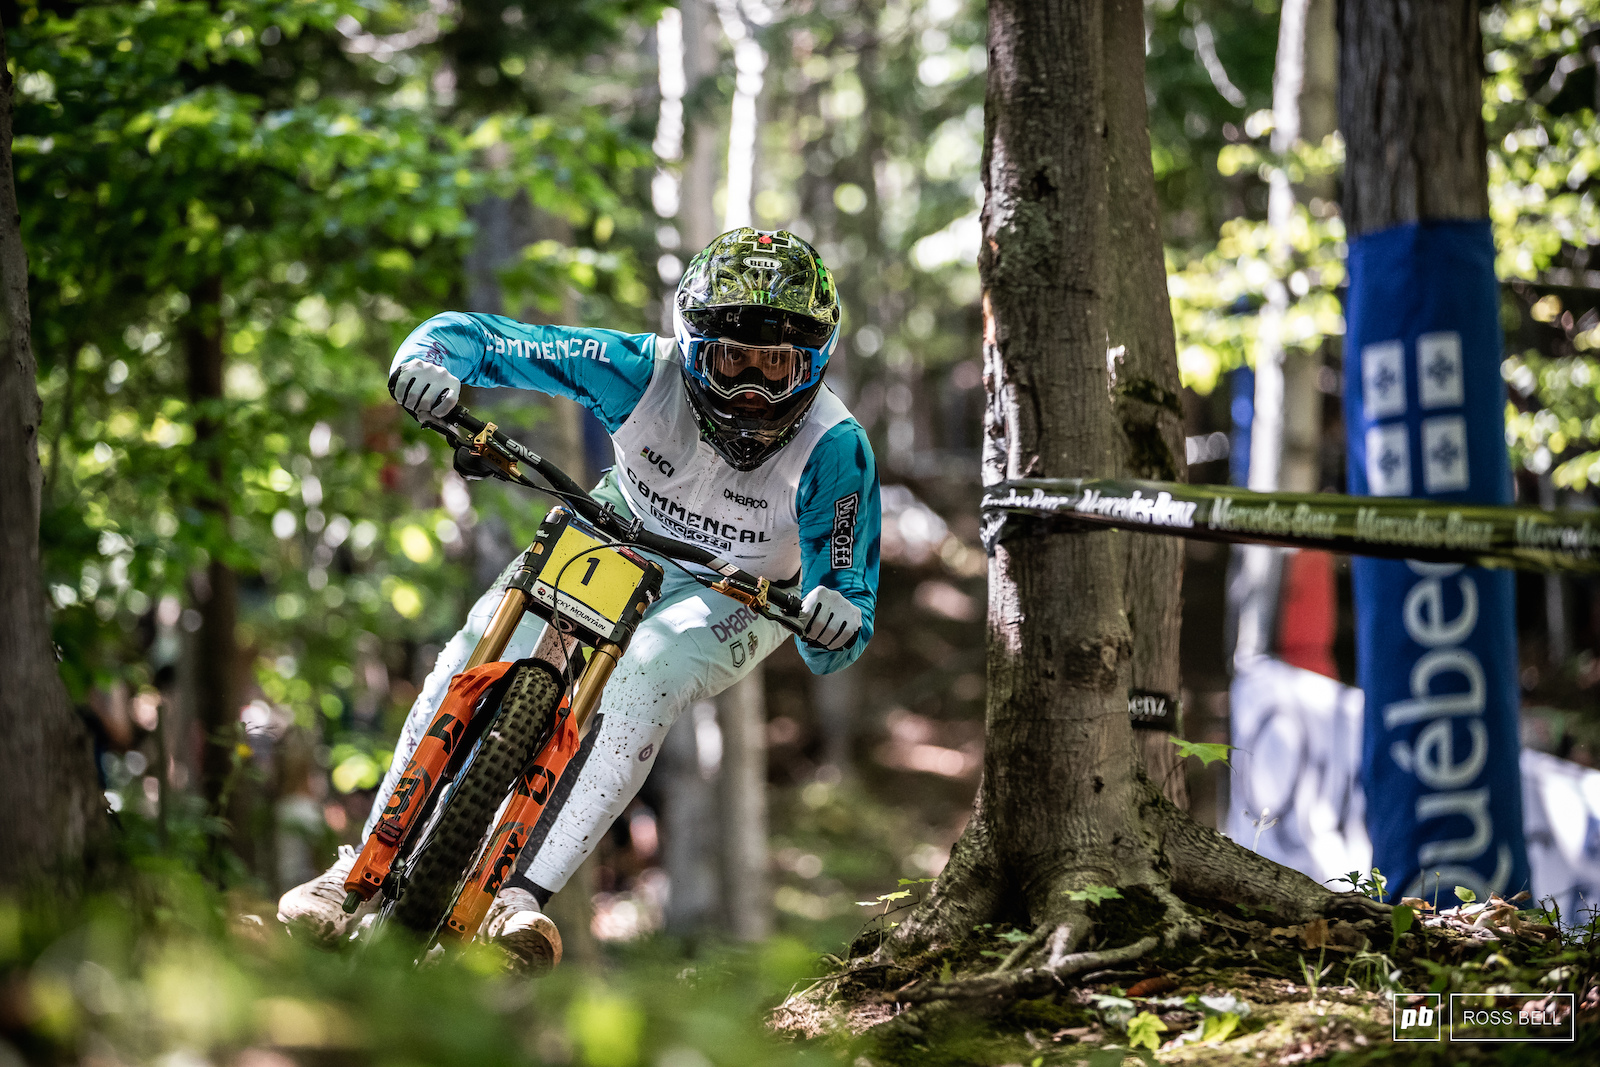 It wasn t to be today for series leader Amaury Pierron with a costly crash.